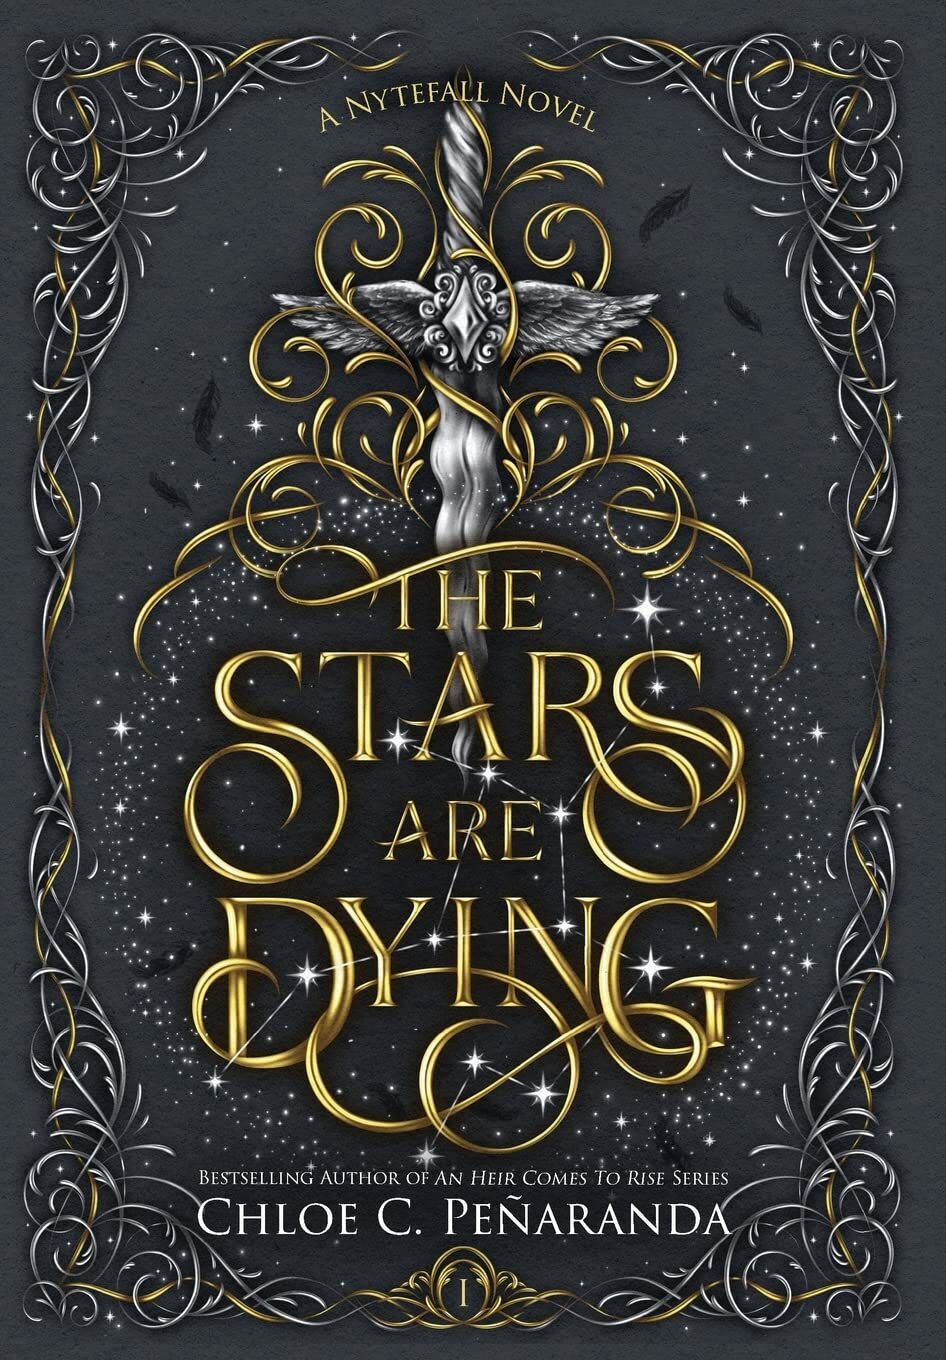 The Stars Are Dying (Nytefall #1)